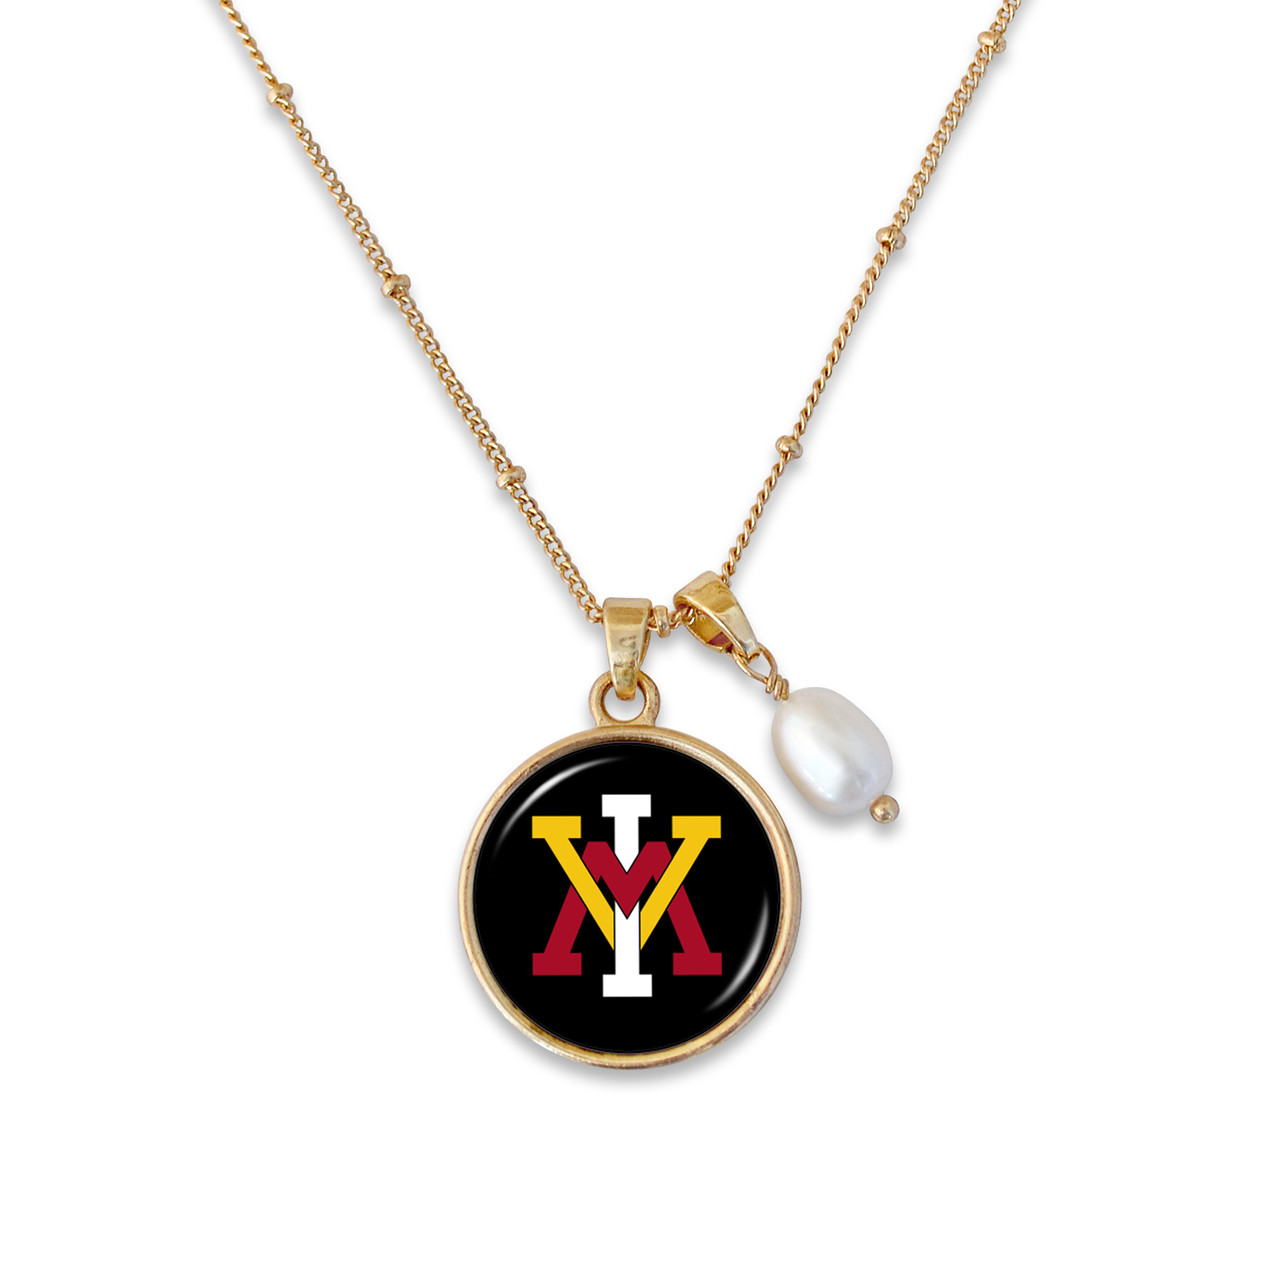 Virginia Military Keydets Necklace - Diana